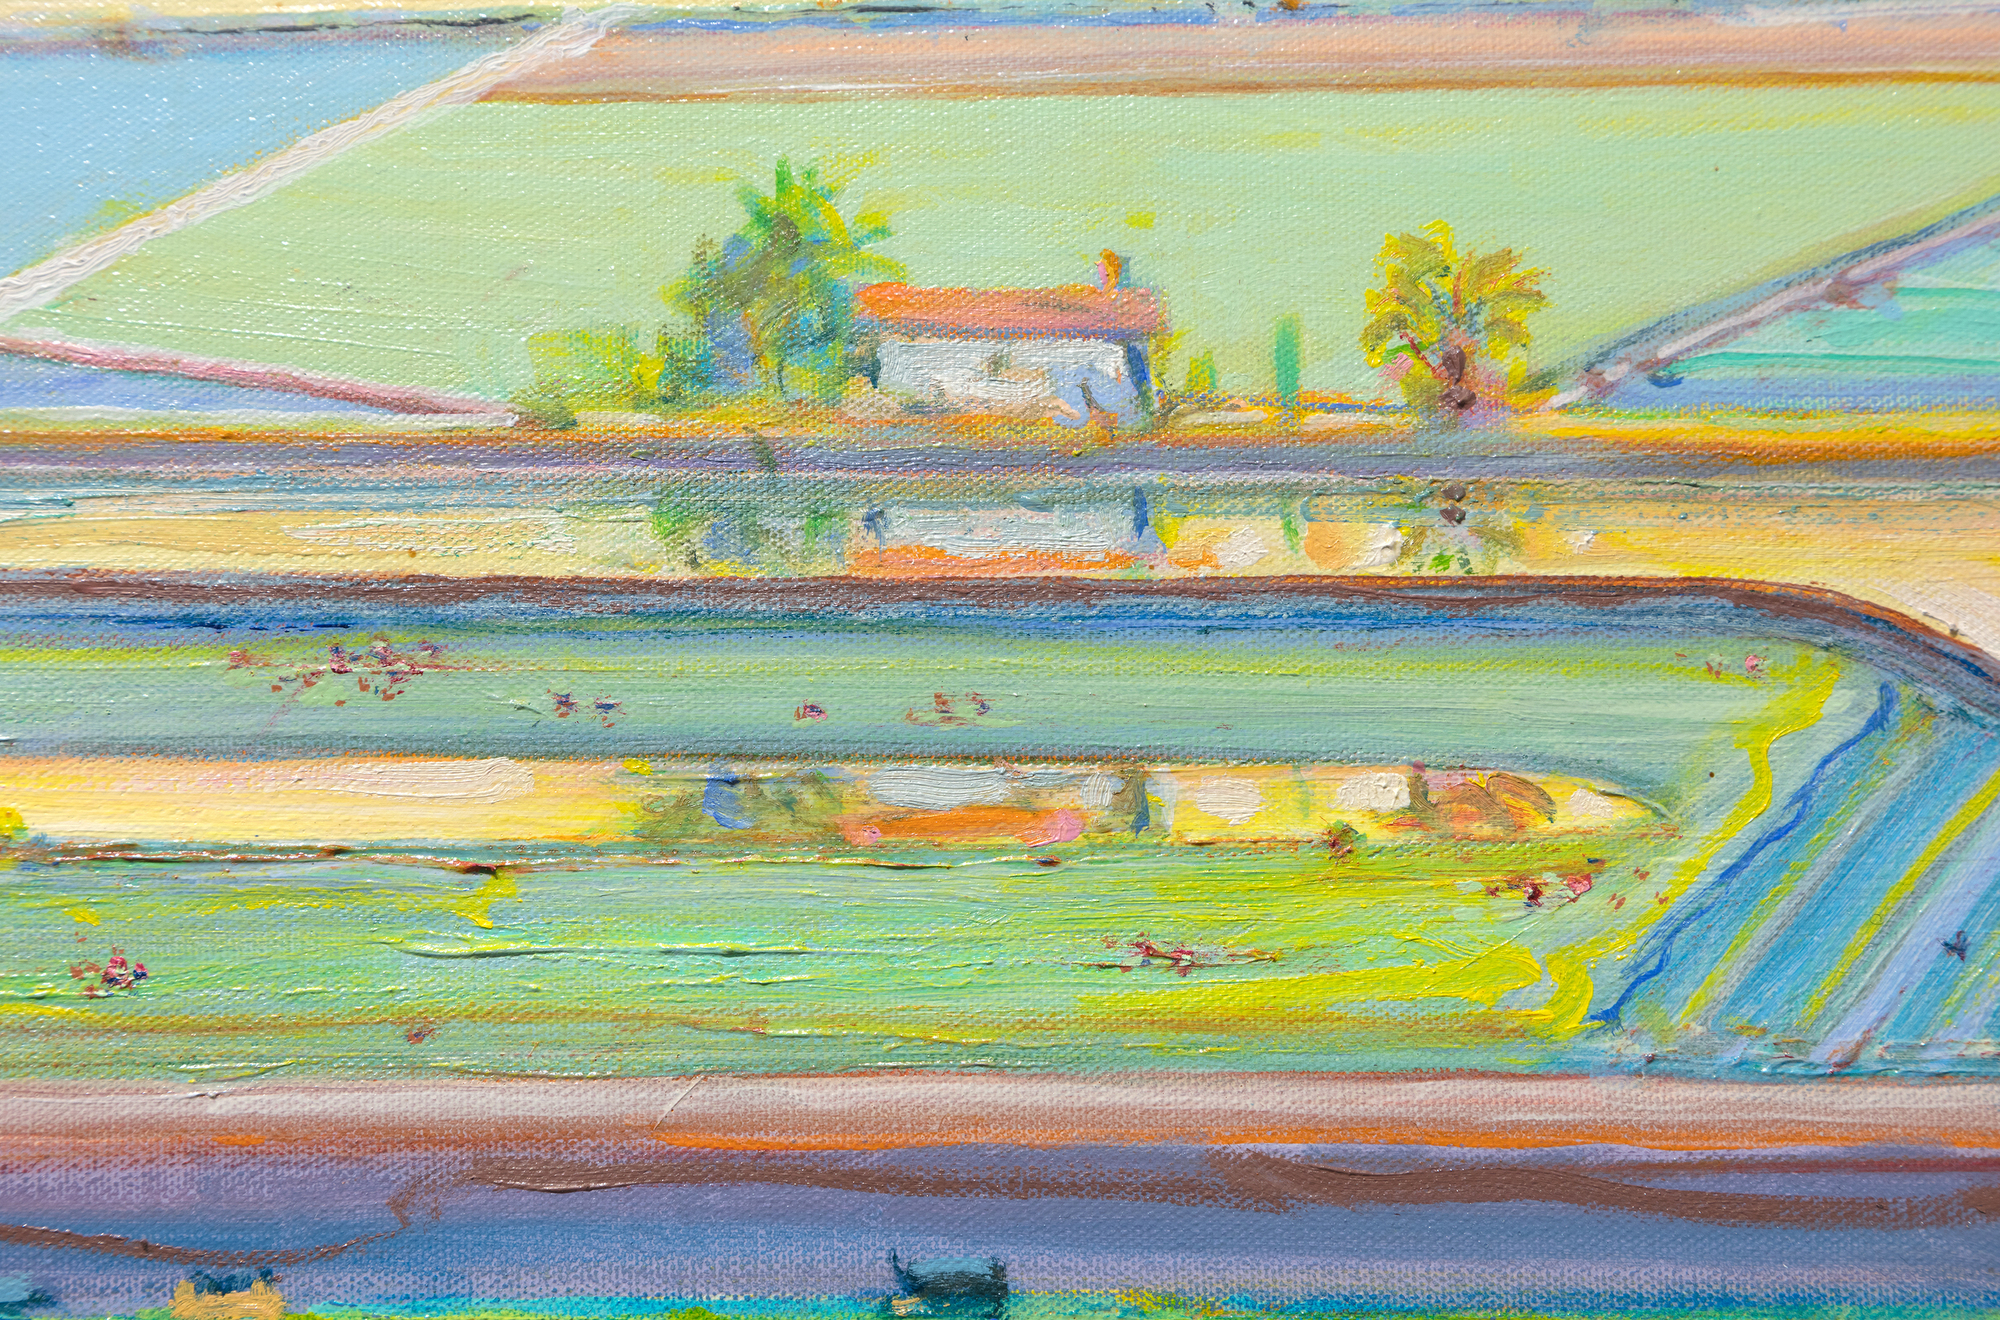 When forty rural Sacramento Delta landscapes by Wayne Thiebaud were unveiled at a San Francisco gallery opening in November 1997, attendees were amazed by paintings they never anticipated. This new frontier betrayed neither Thiebaud’s mastery of confectionary-shop colors nor his impeccable eye for formal relationships. Rather, his admirers were shocked to learn that all but seven of these forty interpretations had been completed in just two years. As his son Paul recalled, “the refinements of my father’s artistic process were ever changing in a chameleon-like frenzy.” The new direction had proved an exhilarating experience, each painting an affirmation of Wayne Thiebaud’s impassioned response to the fields and levees of the local environment he dearly loved. <br><br>Viewed from the perspective of a bird or a plane, The Riverhouse is an agrarian tapestry conceived with a kaleidoscopic range of shapes and simple forms; fields striped with furrows or striated fans, deliriously colored parallelograms and trapezoids, an orchard garnished pizza-shaped wedge, and a boldly limned river, the lifeline of a thirsty California central valley largely dependent upon transported water.<br><br>The Riverhouse is a painting that ‘moves’ between seamlessly shifting planes of aerial mapping that recalls Richard Diebenkorn’s stroke of insight when he took his first commercial flight the spring of 1951, and those partitions engaging a more standard vanishing point perspective. Thiebaud explained his process as “orchestrating with as much variety and tempo as I can.” Brightly lit with a fauve-like intensity, The Riverhouse is a heady concoction of vibrant pigment and rich impasto; one that recalls his indebtedness to Pierre Bonnard whose color Thiebaud referred to as “a bucket full of hot coals and ice cubes.” Among his many other influences, the insertion of objects — often tiny — that defy a rational sense of scale that reflects his interest in Chinese landscape painting.<br><br>As always, his mastery as a painter recalls his titular pies and cakes with their bewitching rainbow-like halos and side-by-side colors of equal intensity but differing in hues to create the vibratory effect of an aura, what Thiebaud explained “denotes an attempt to develop as much energy and light and visual power as you can.” Thiebaud’s Sacramento Delta landscapes are an integral and important part of his oeuvre. Paintings such as The Riverhouse rival the best abstract art of the twentieth century. His good friend, Willem de Kooning thought so, too.